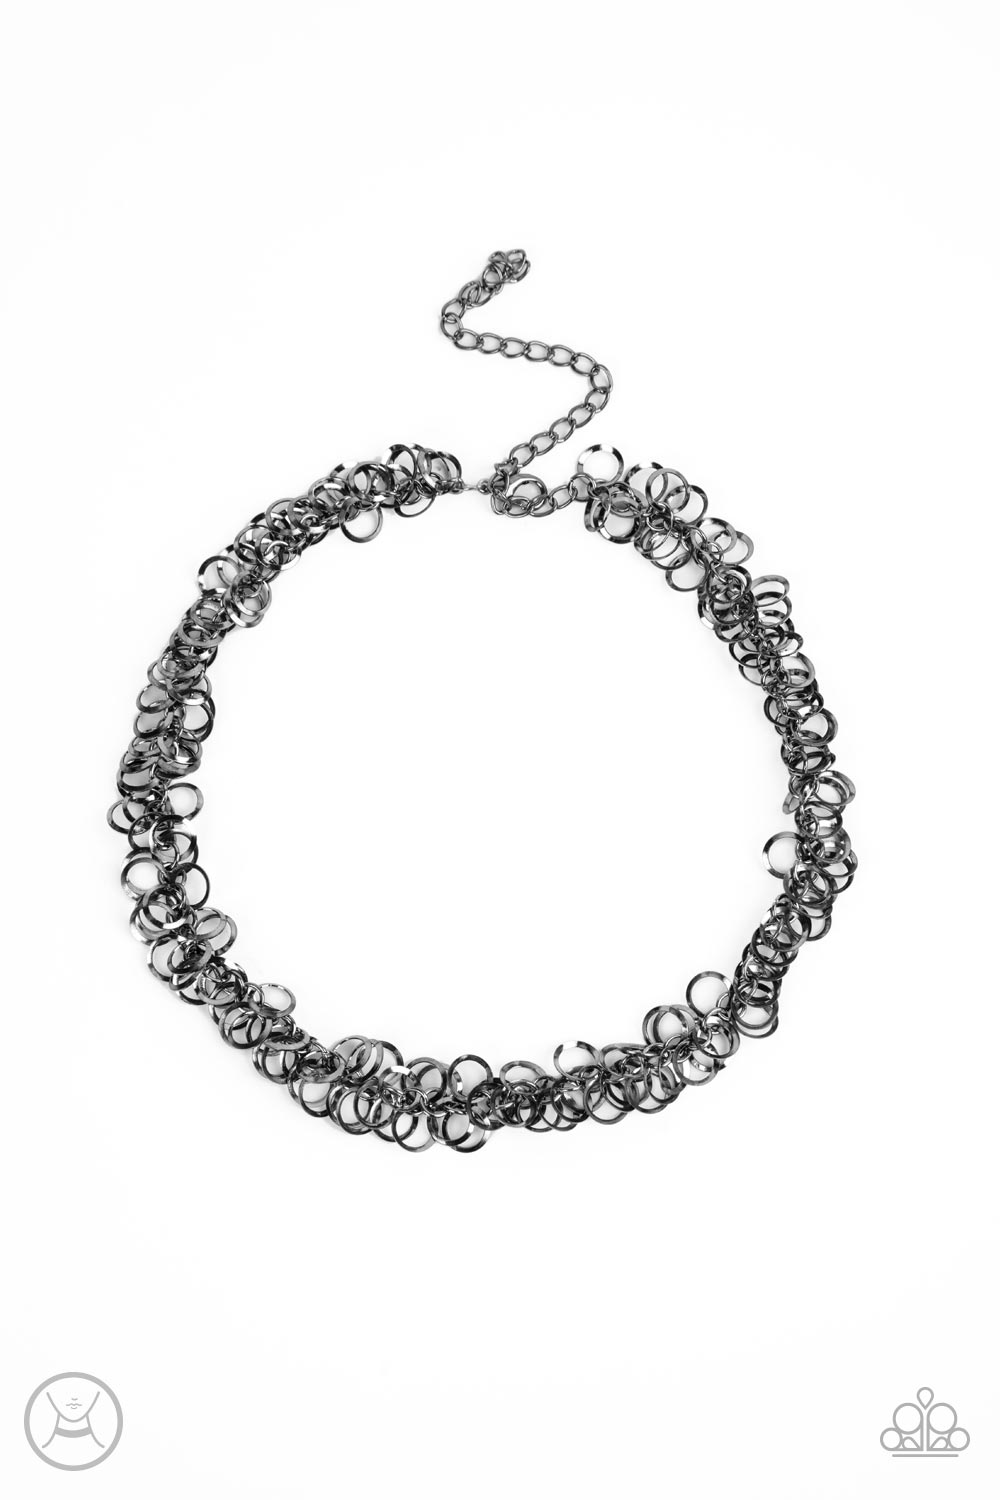 Cause a Commotion - black - Paparazzi necklace